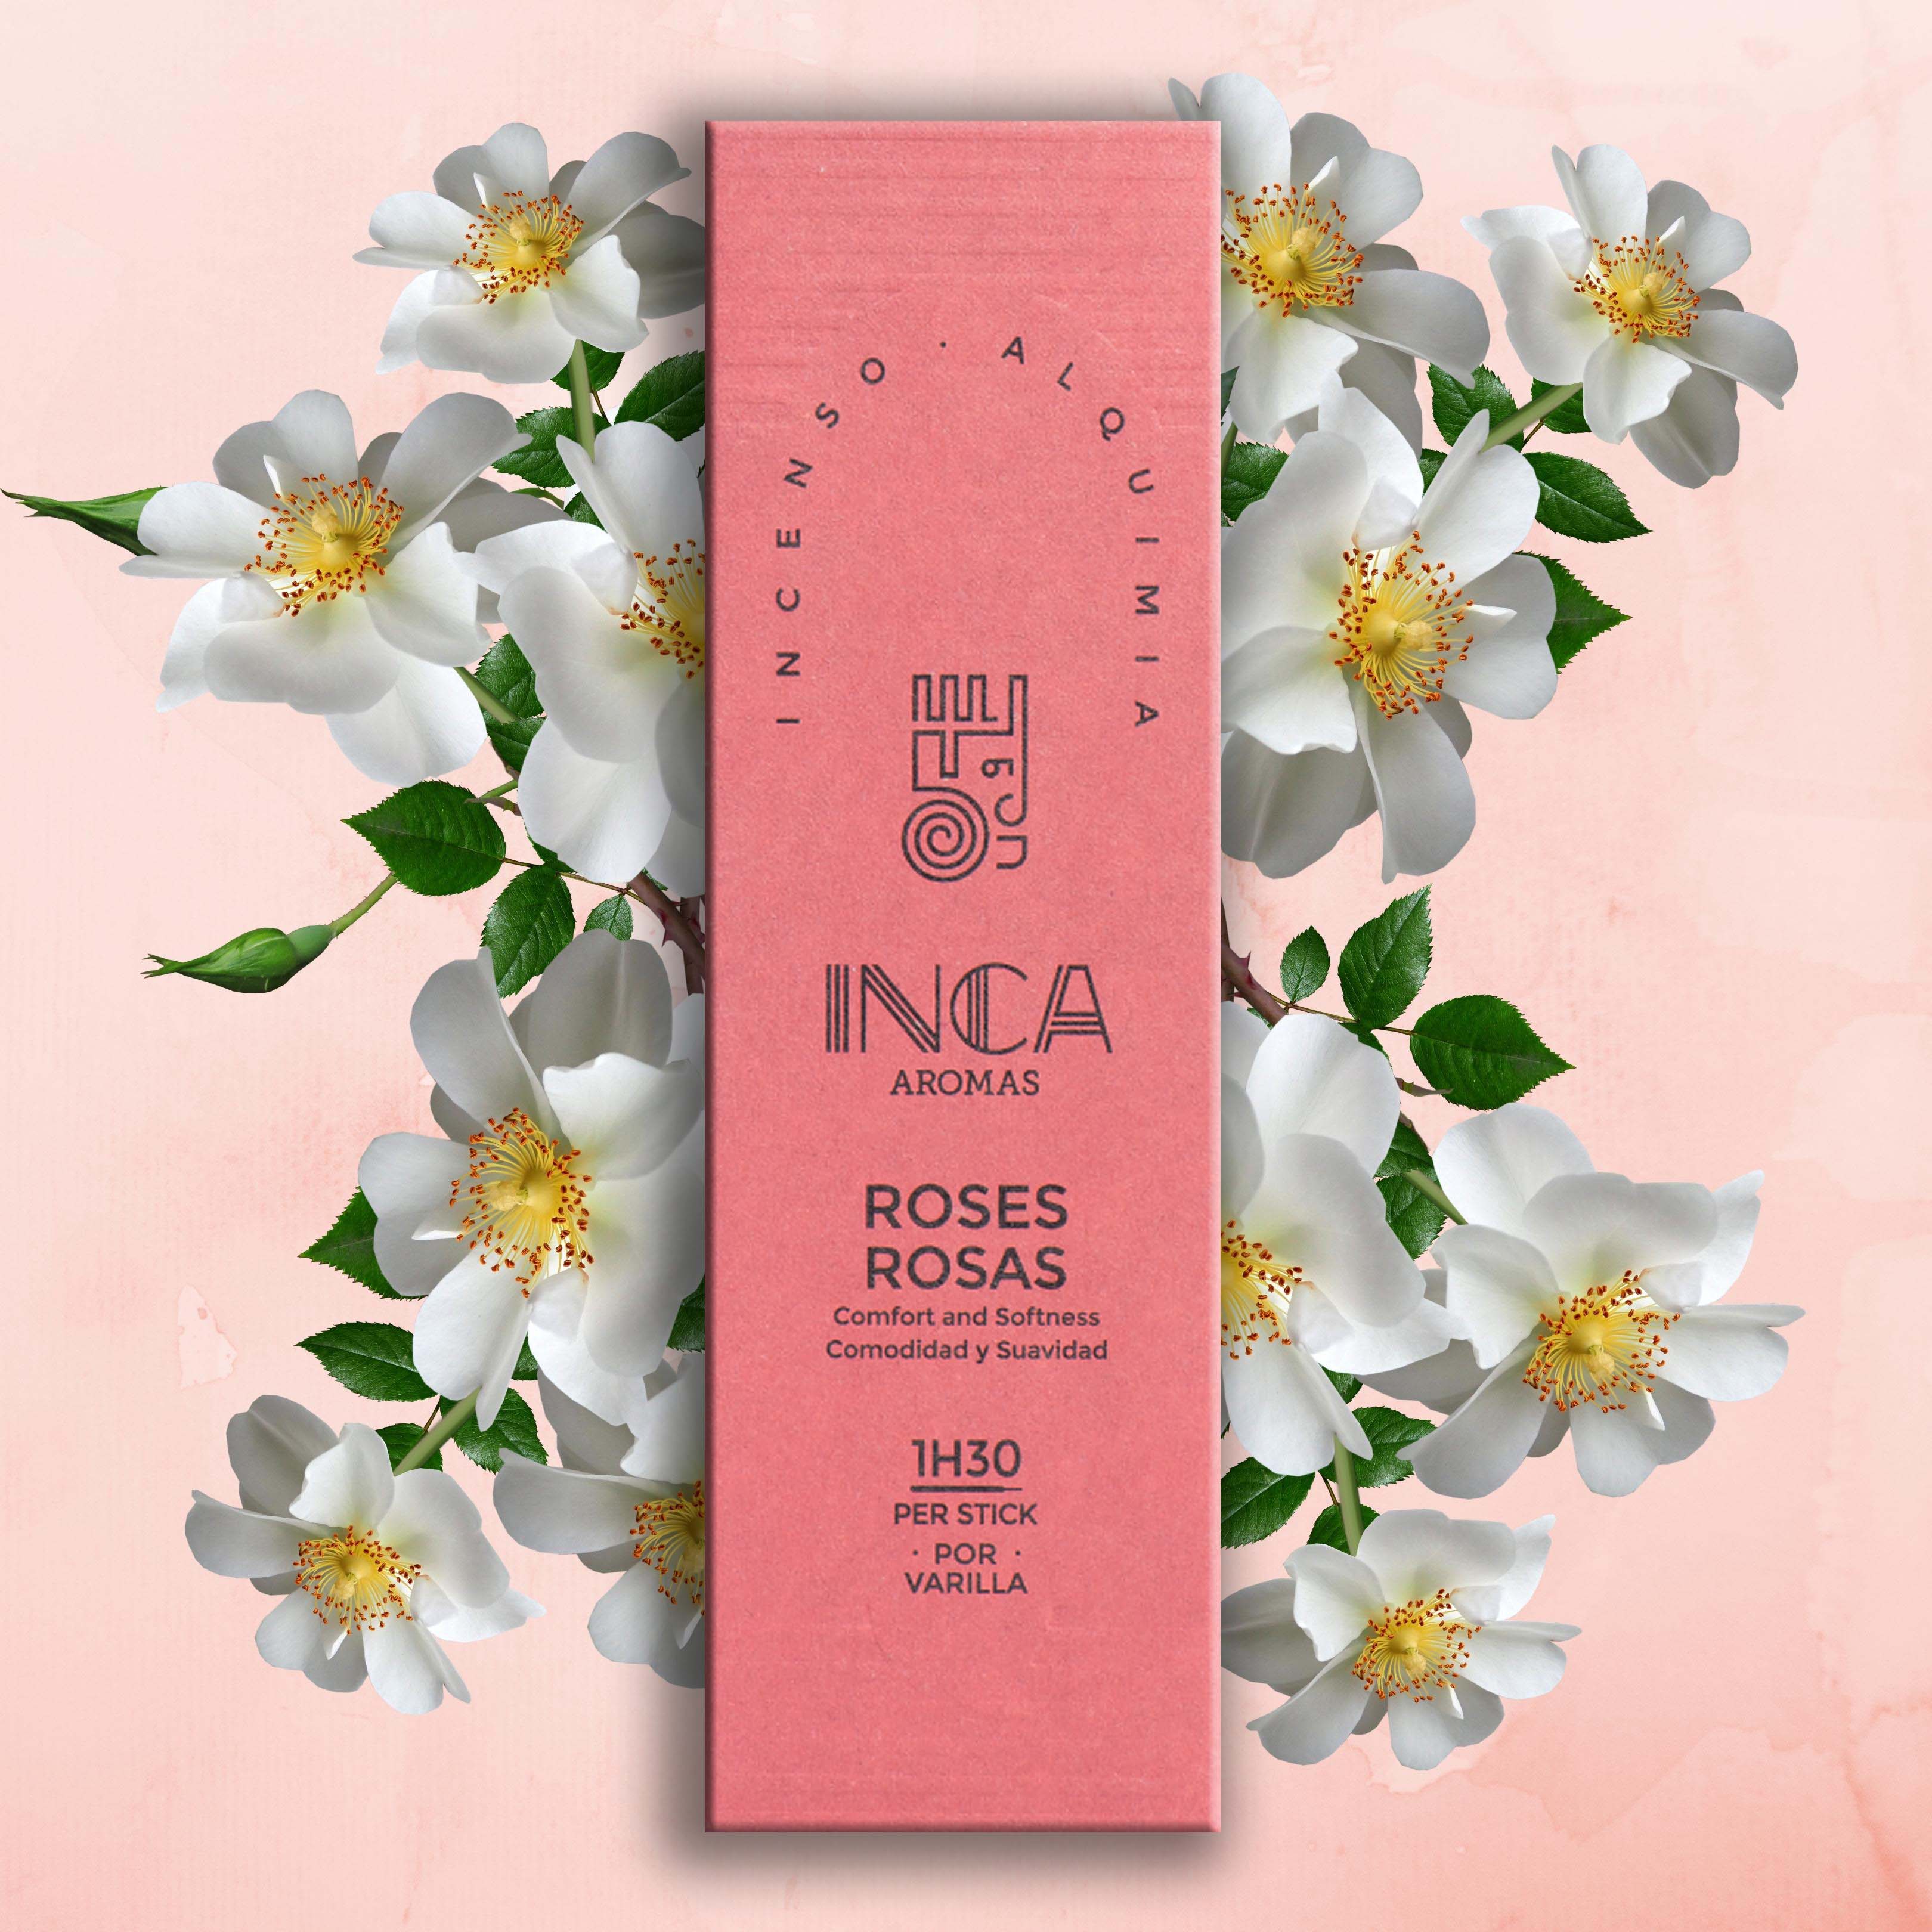 Inca Aromas - Soothing and comforting Rose Incense. Incense